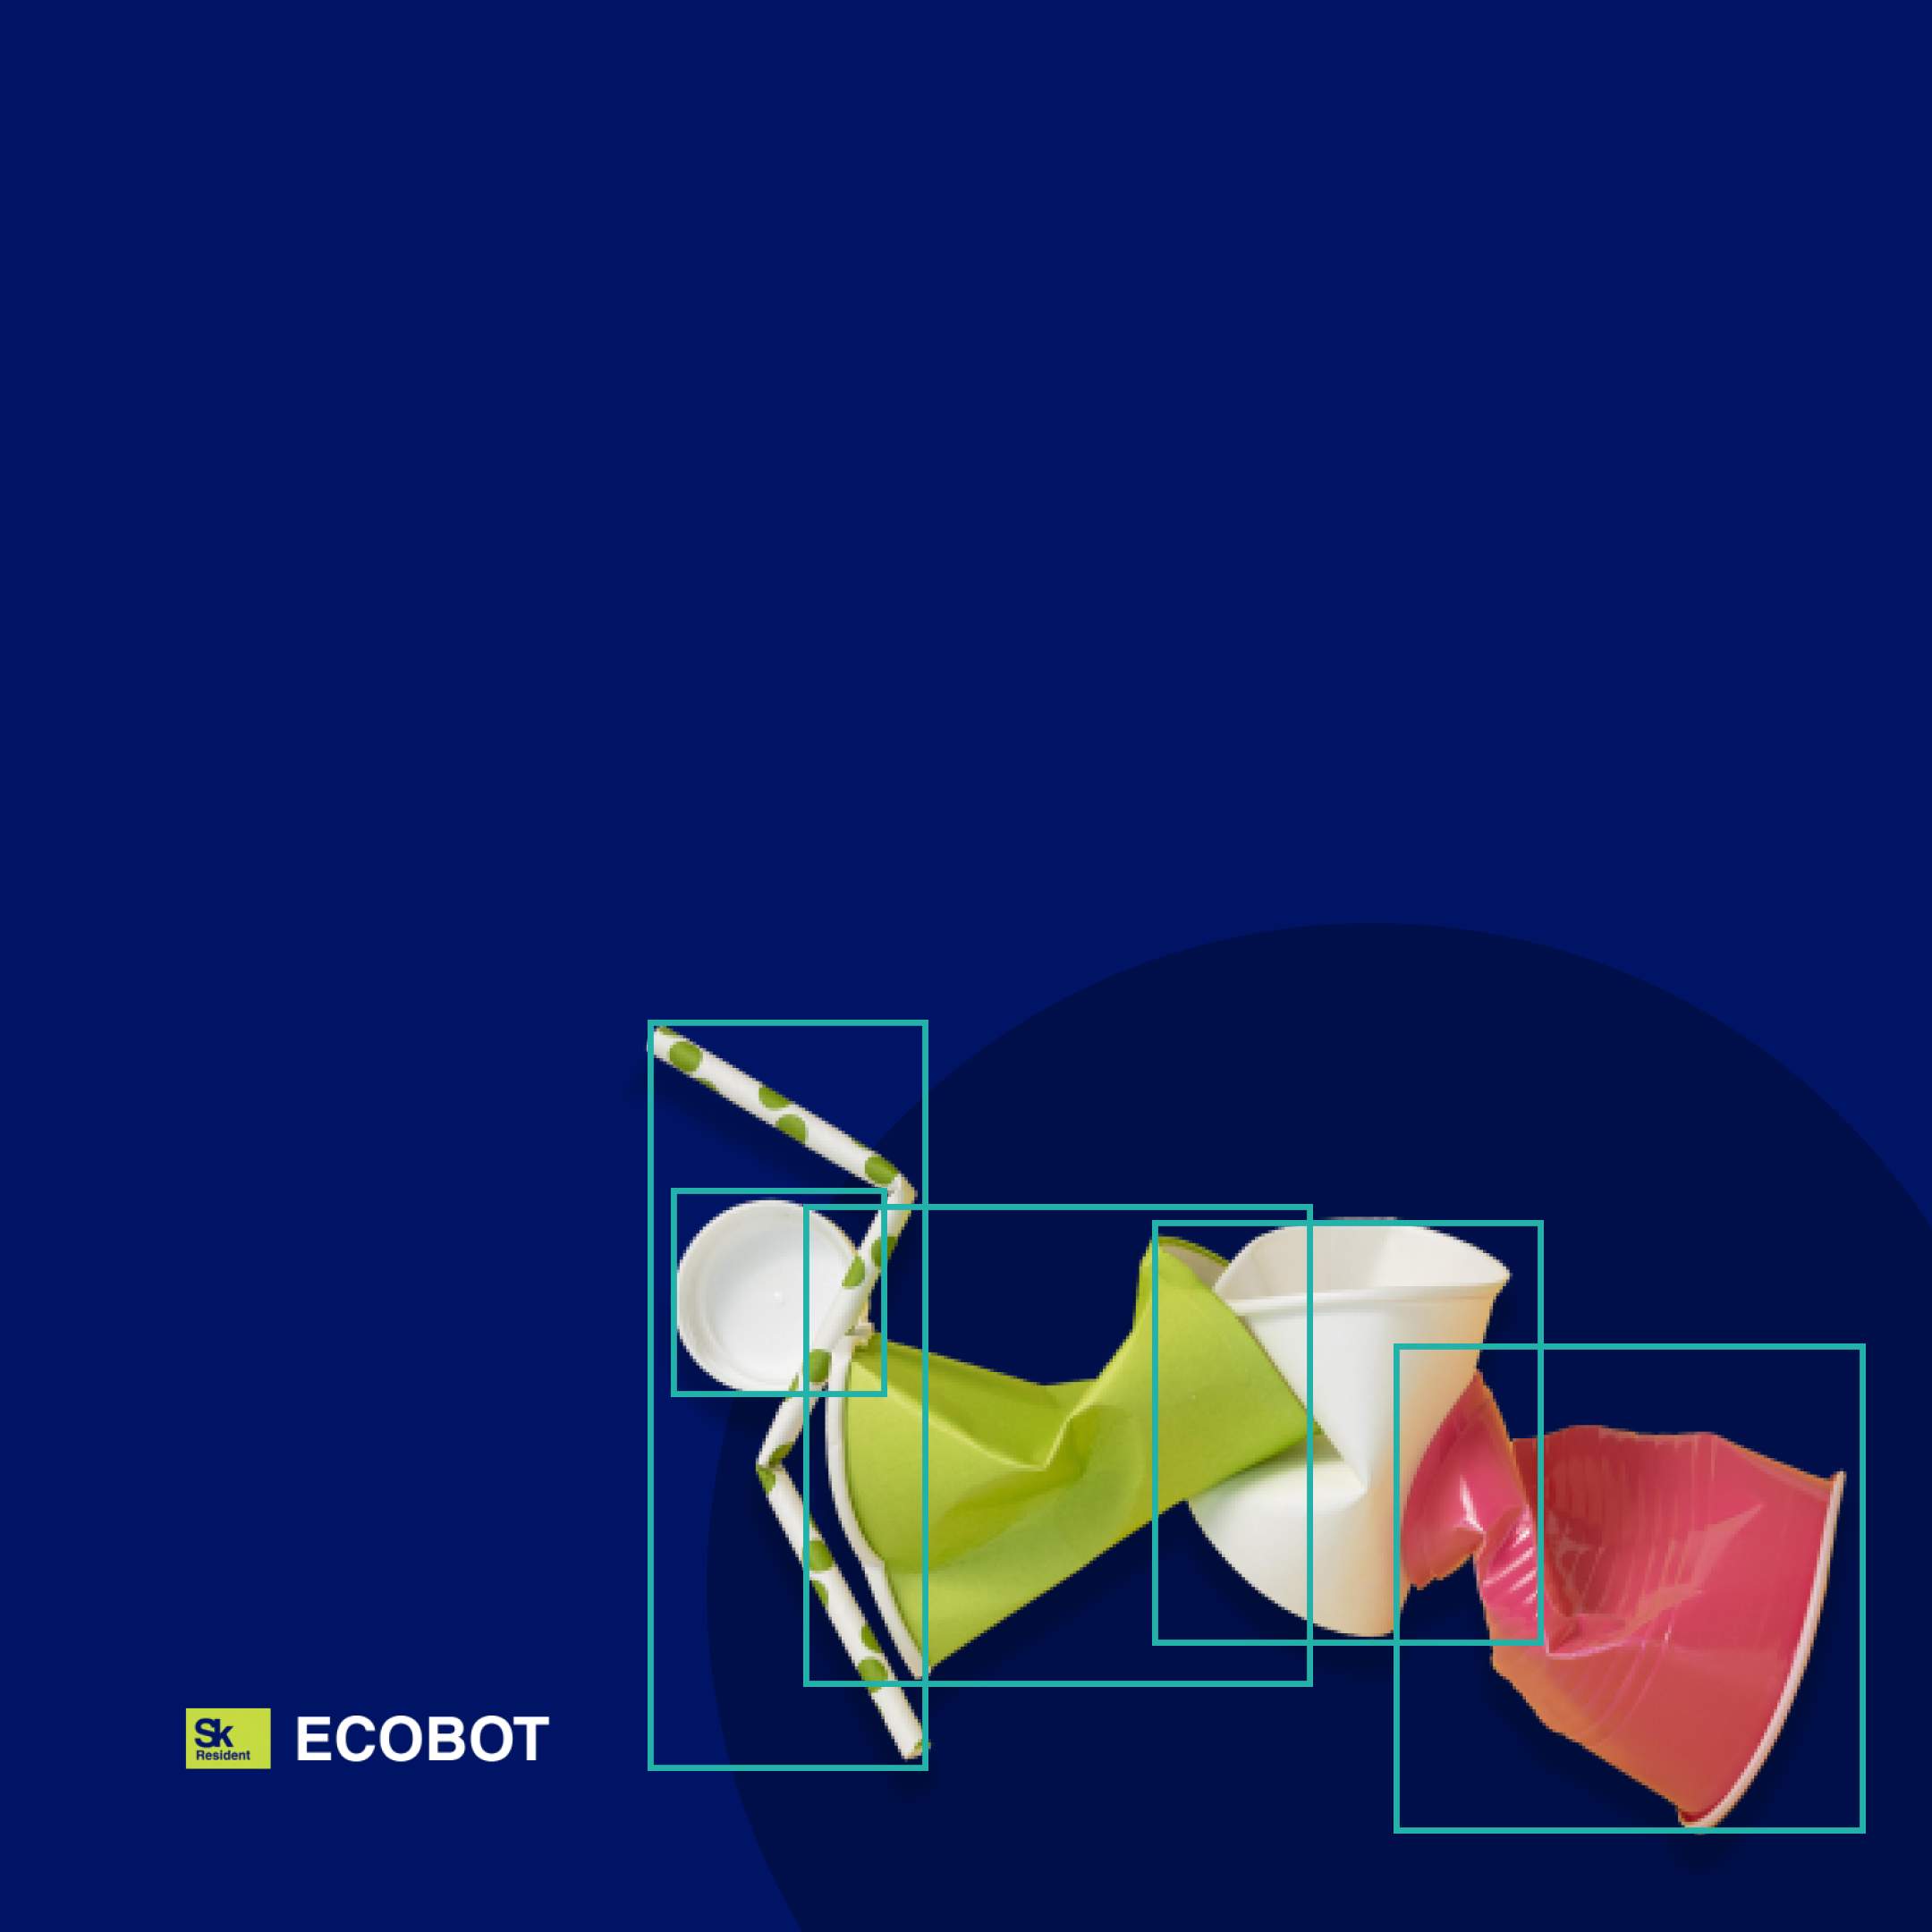 Computer vision for ECOBOT recycling company